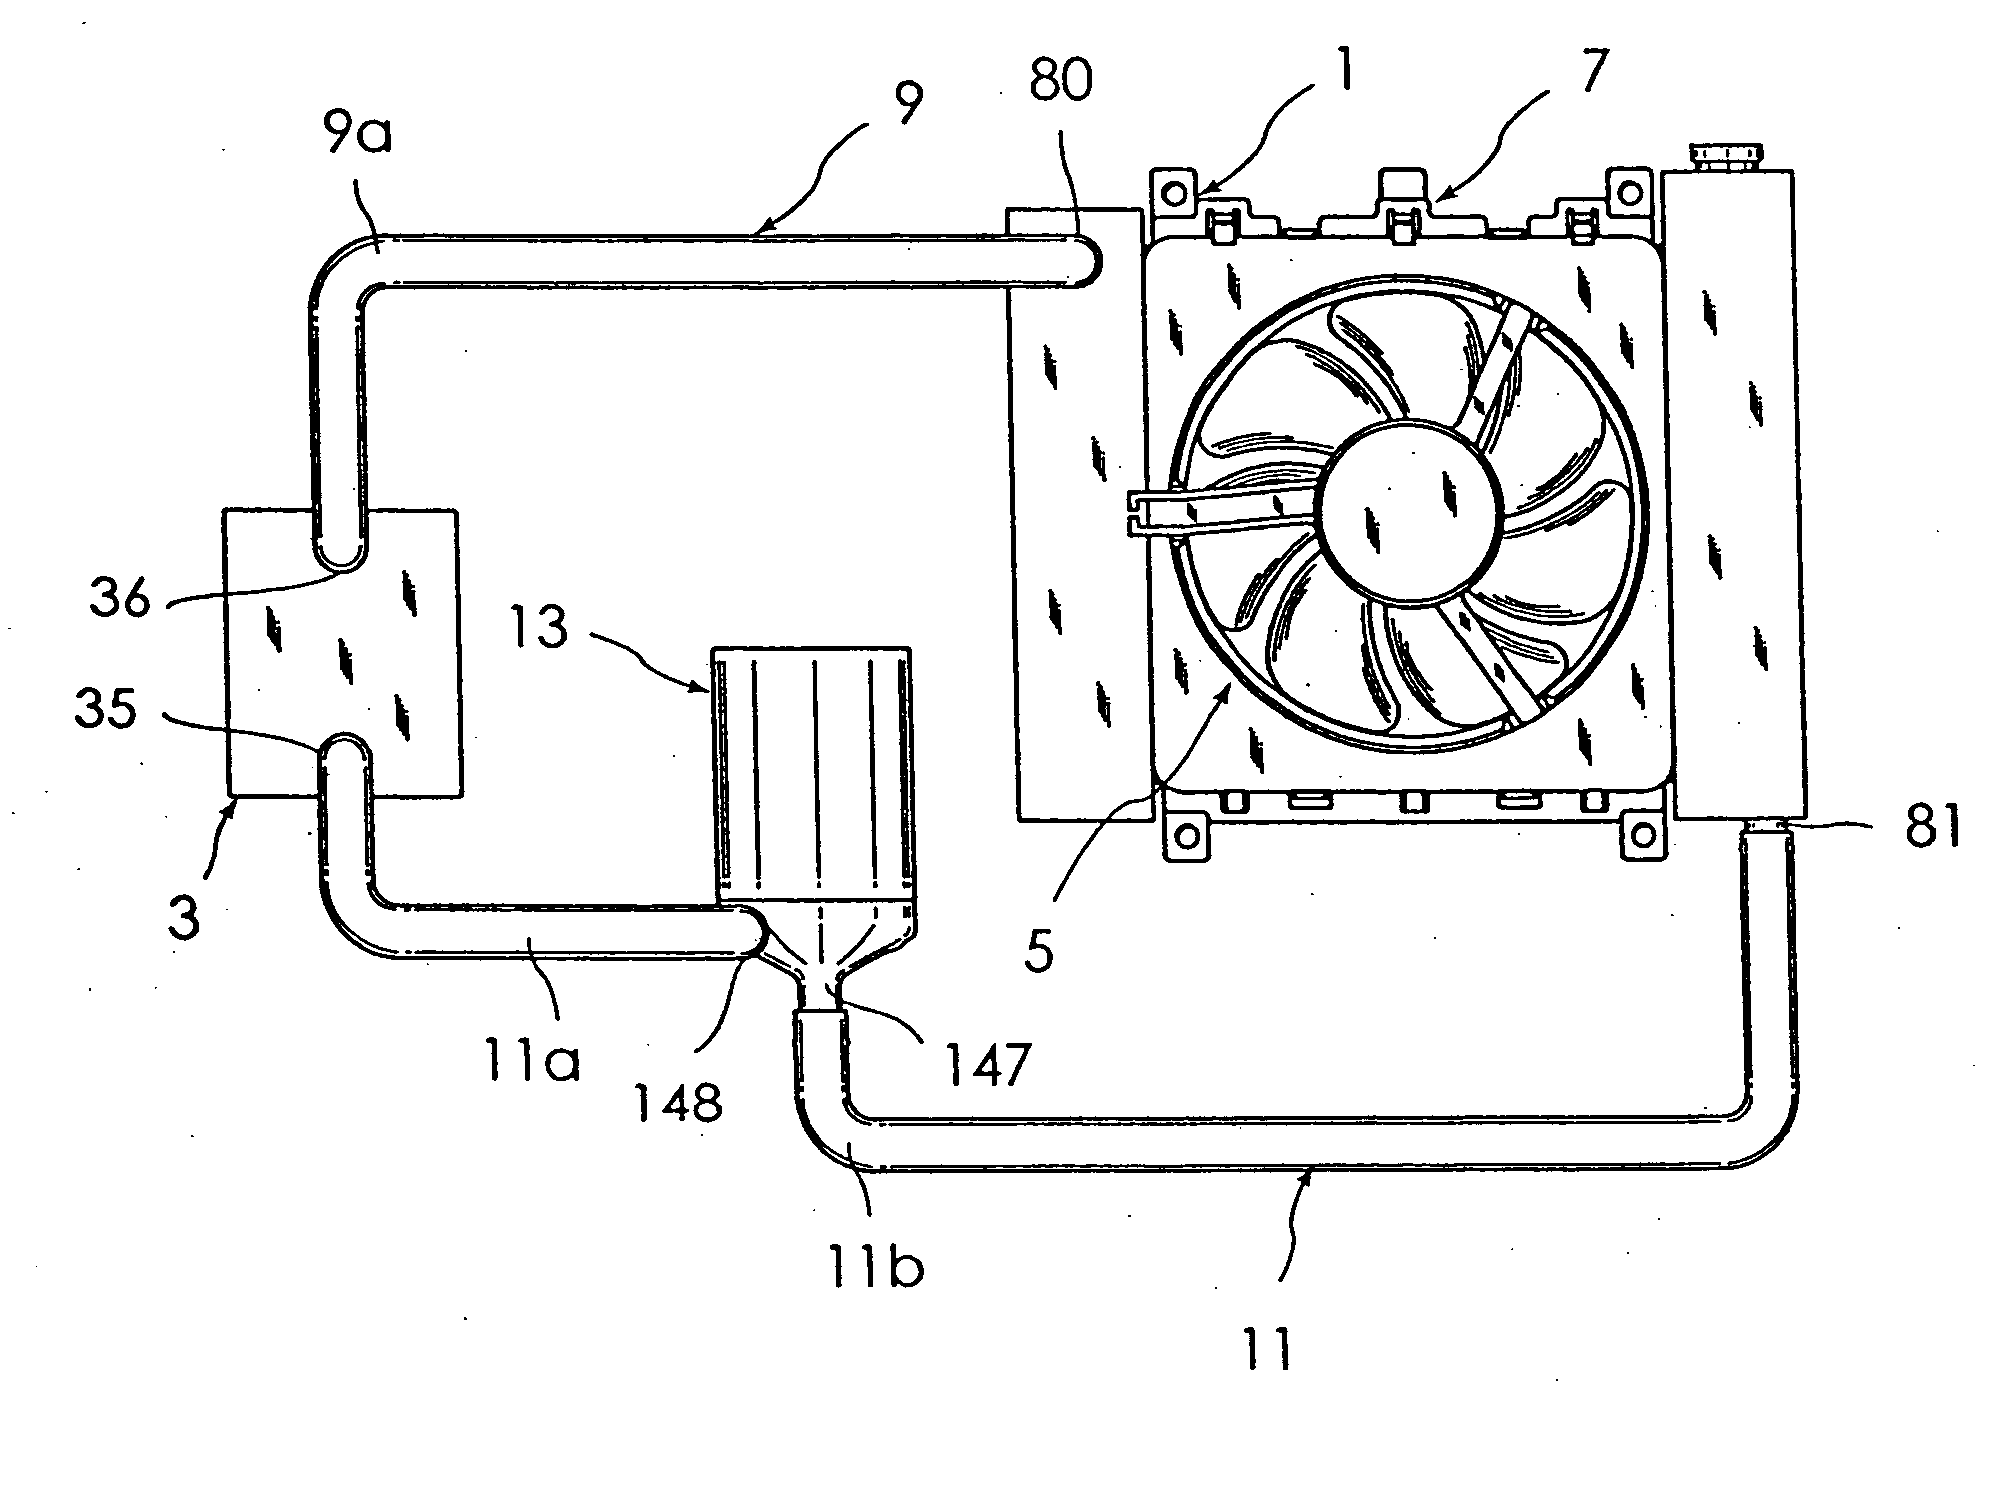 Electronic component cooling apparatus